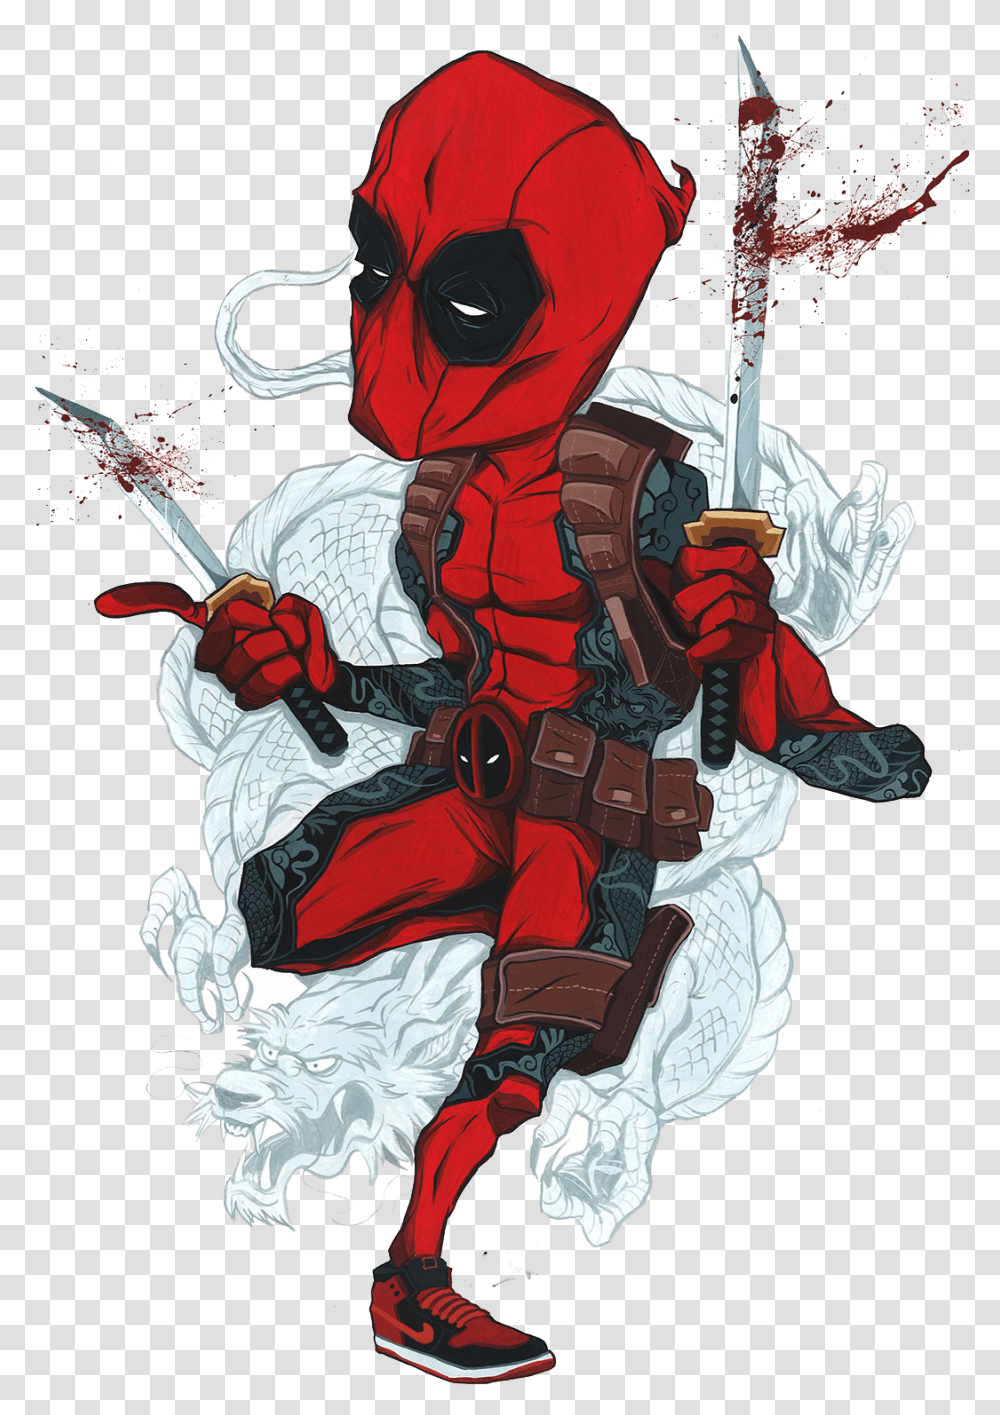 Spiderman Character Fictional Deadpool And Spiderman Anime, Person, Human, Knight, Samurai Transparent Png